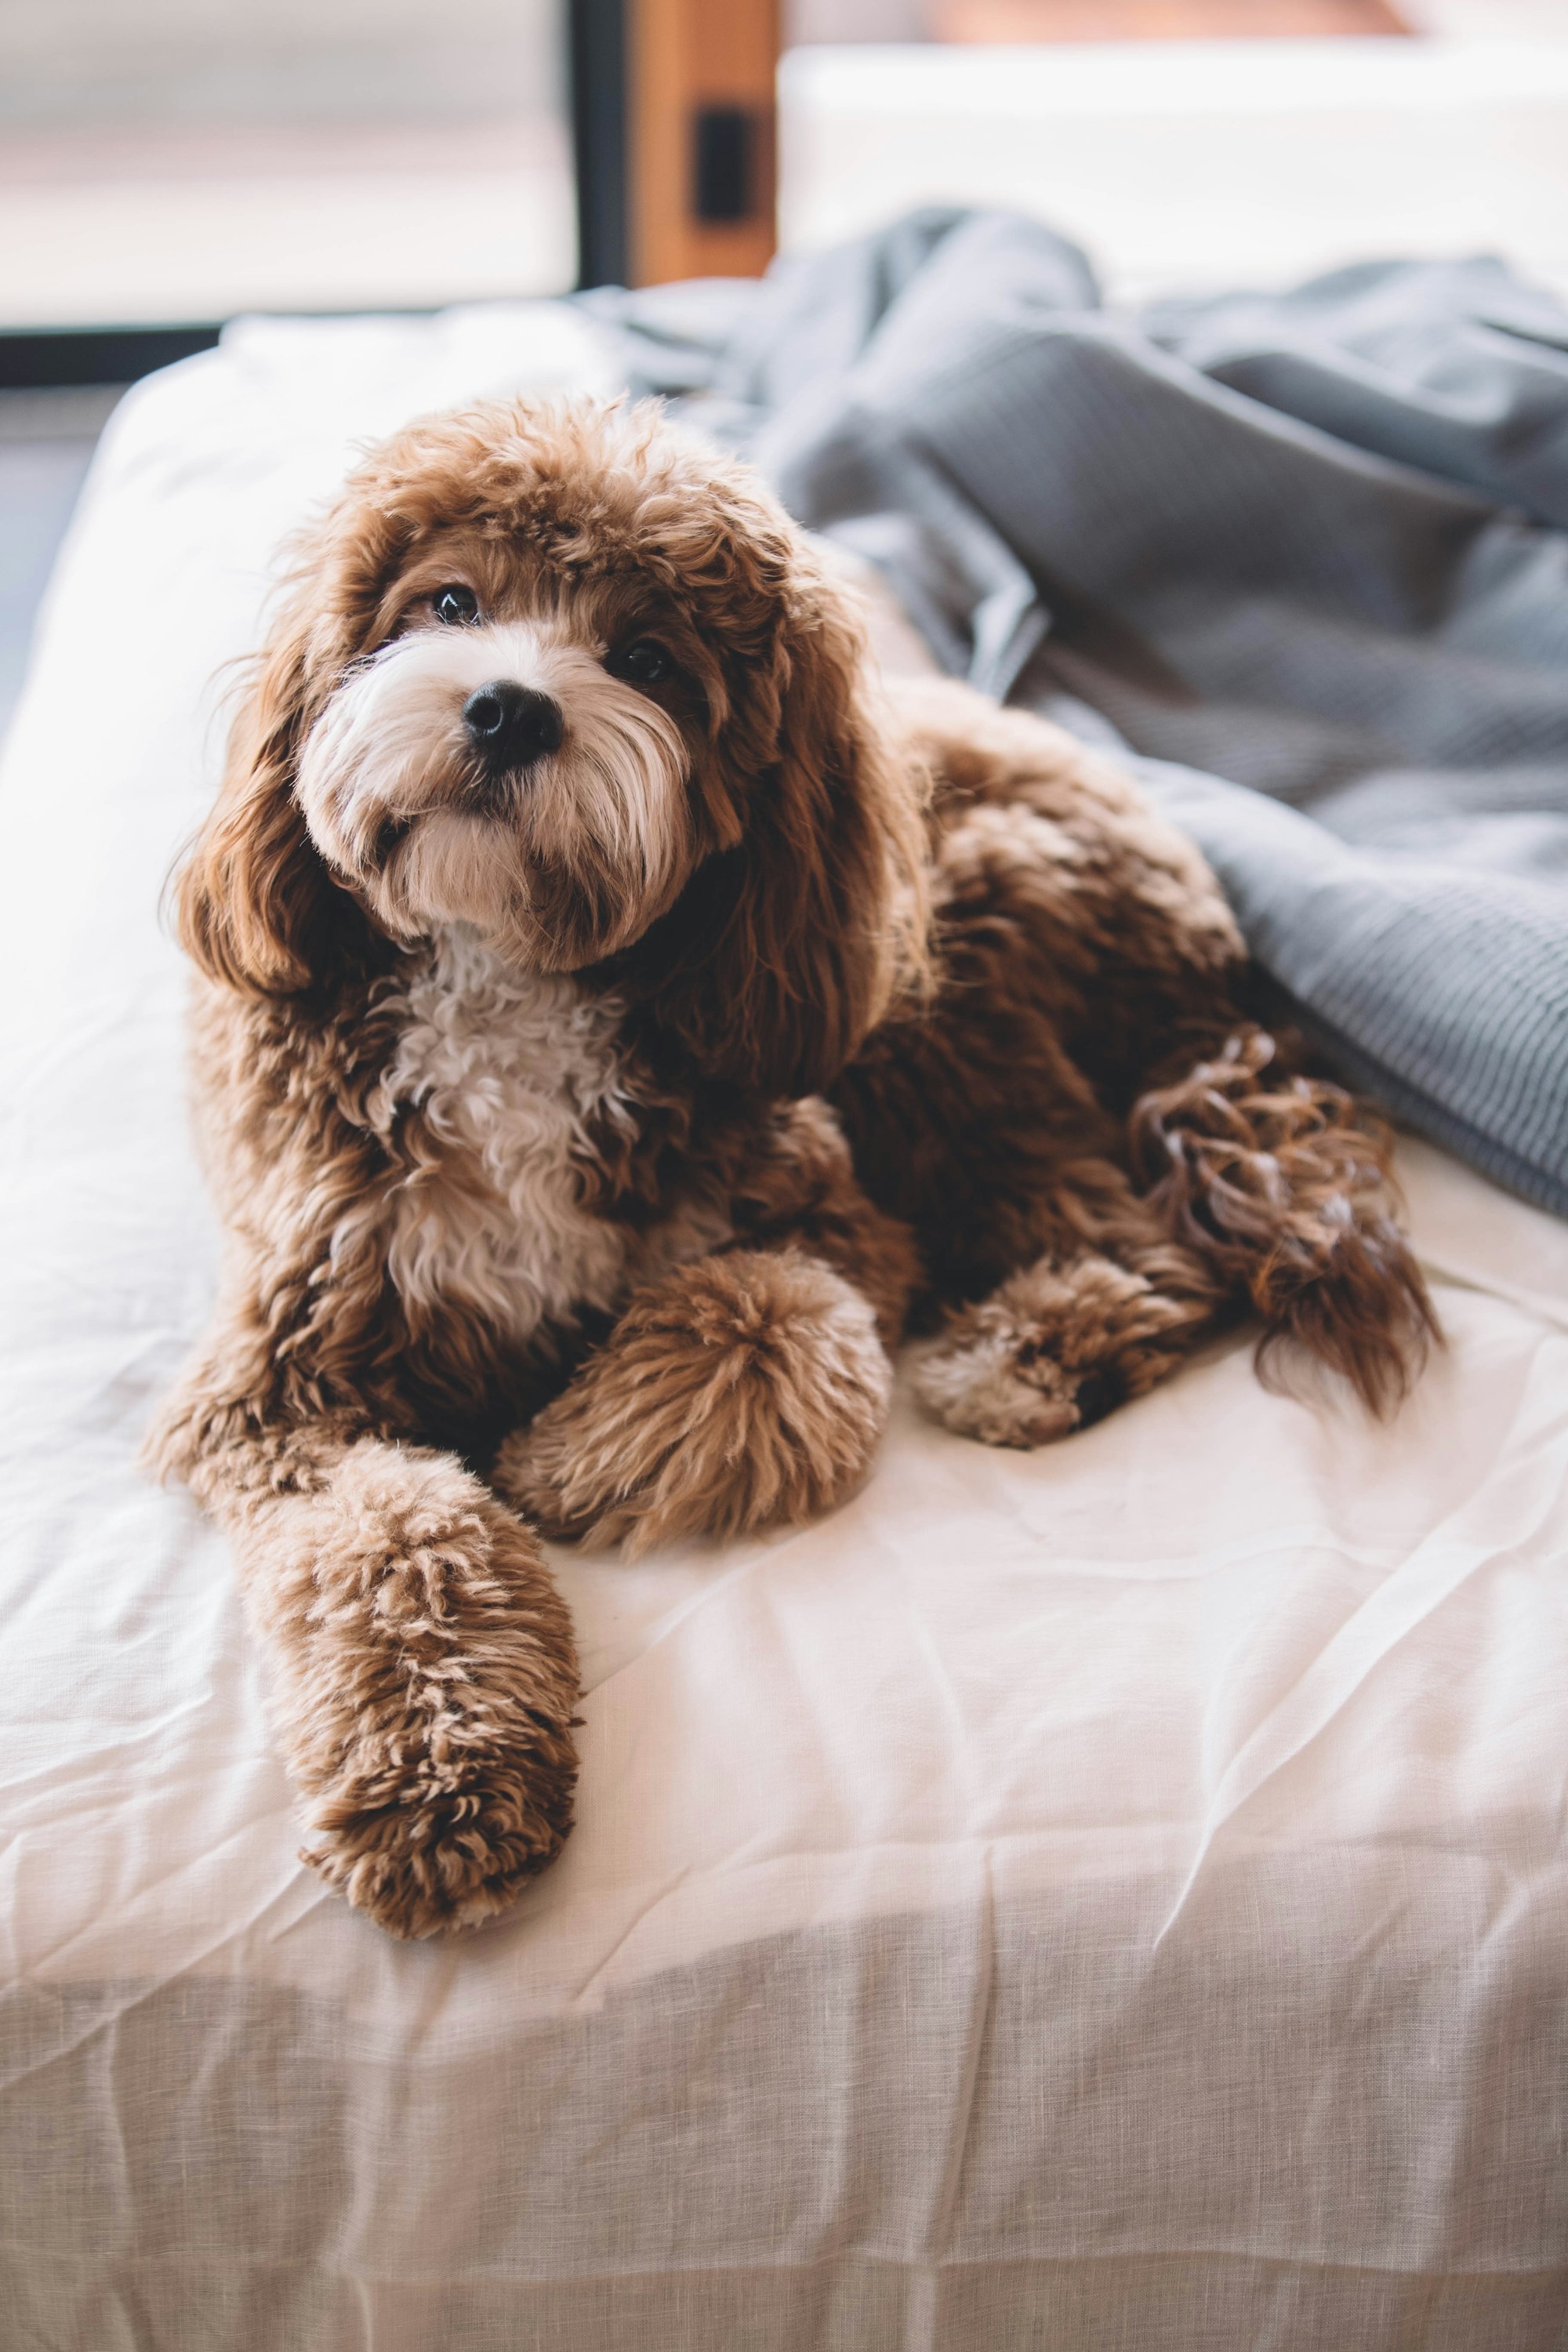 Odie (@odiethecavapoo) enjoying his time in a Joshua Tree, California AirBNB.

If you find my photos useful, please consider subscribing to me on YouTube for the occasional photography tutorial and much more - https://bit.ly/3smVlKp - I'd greatly appreciate it!